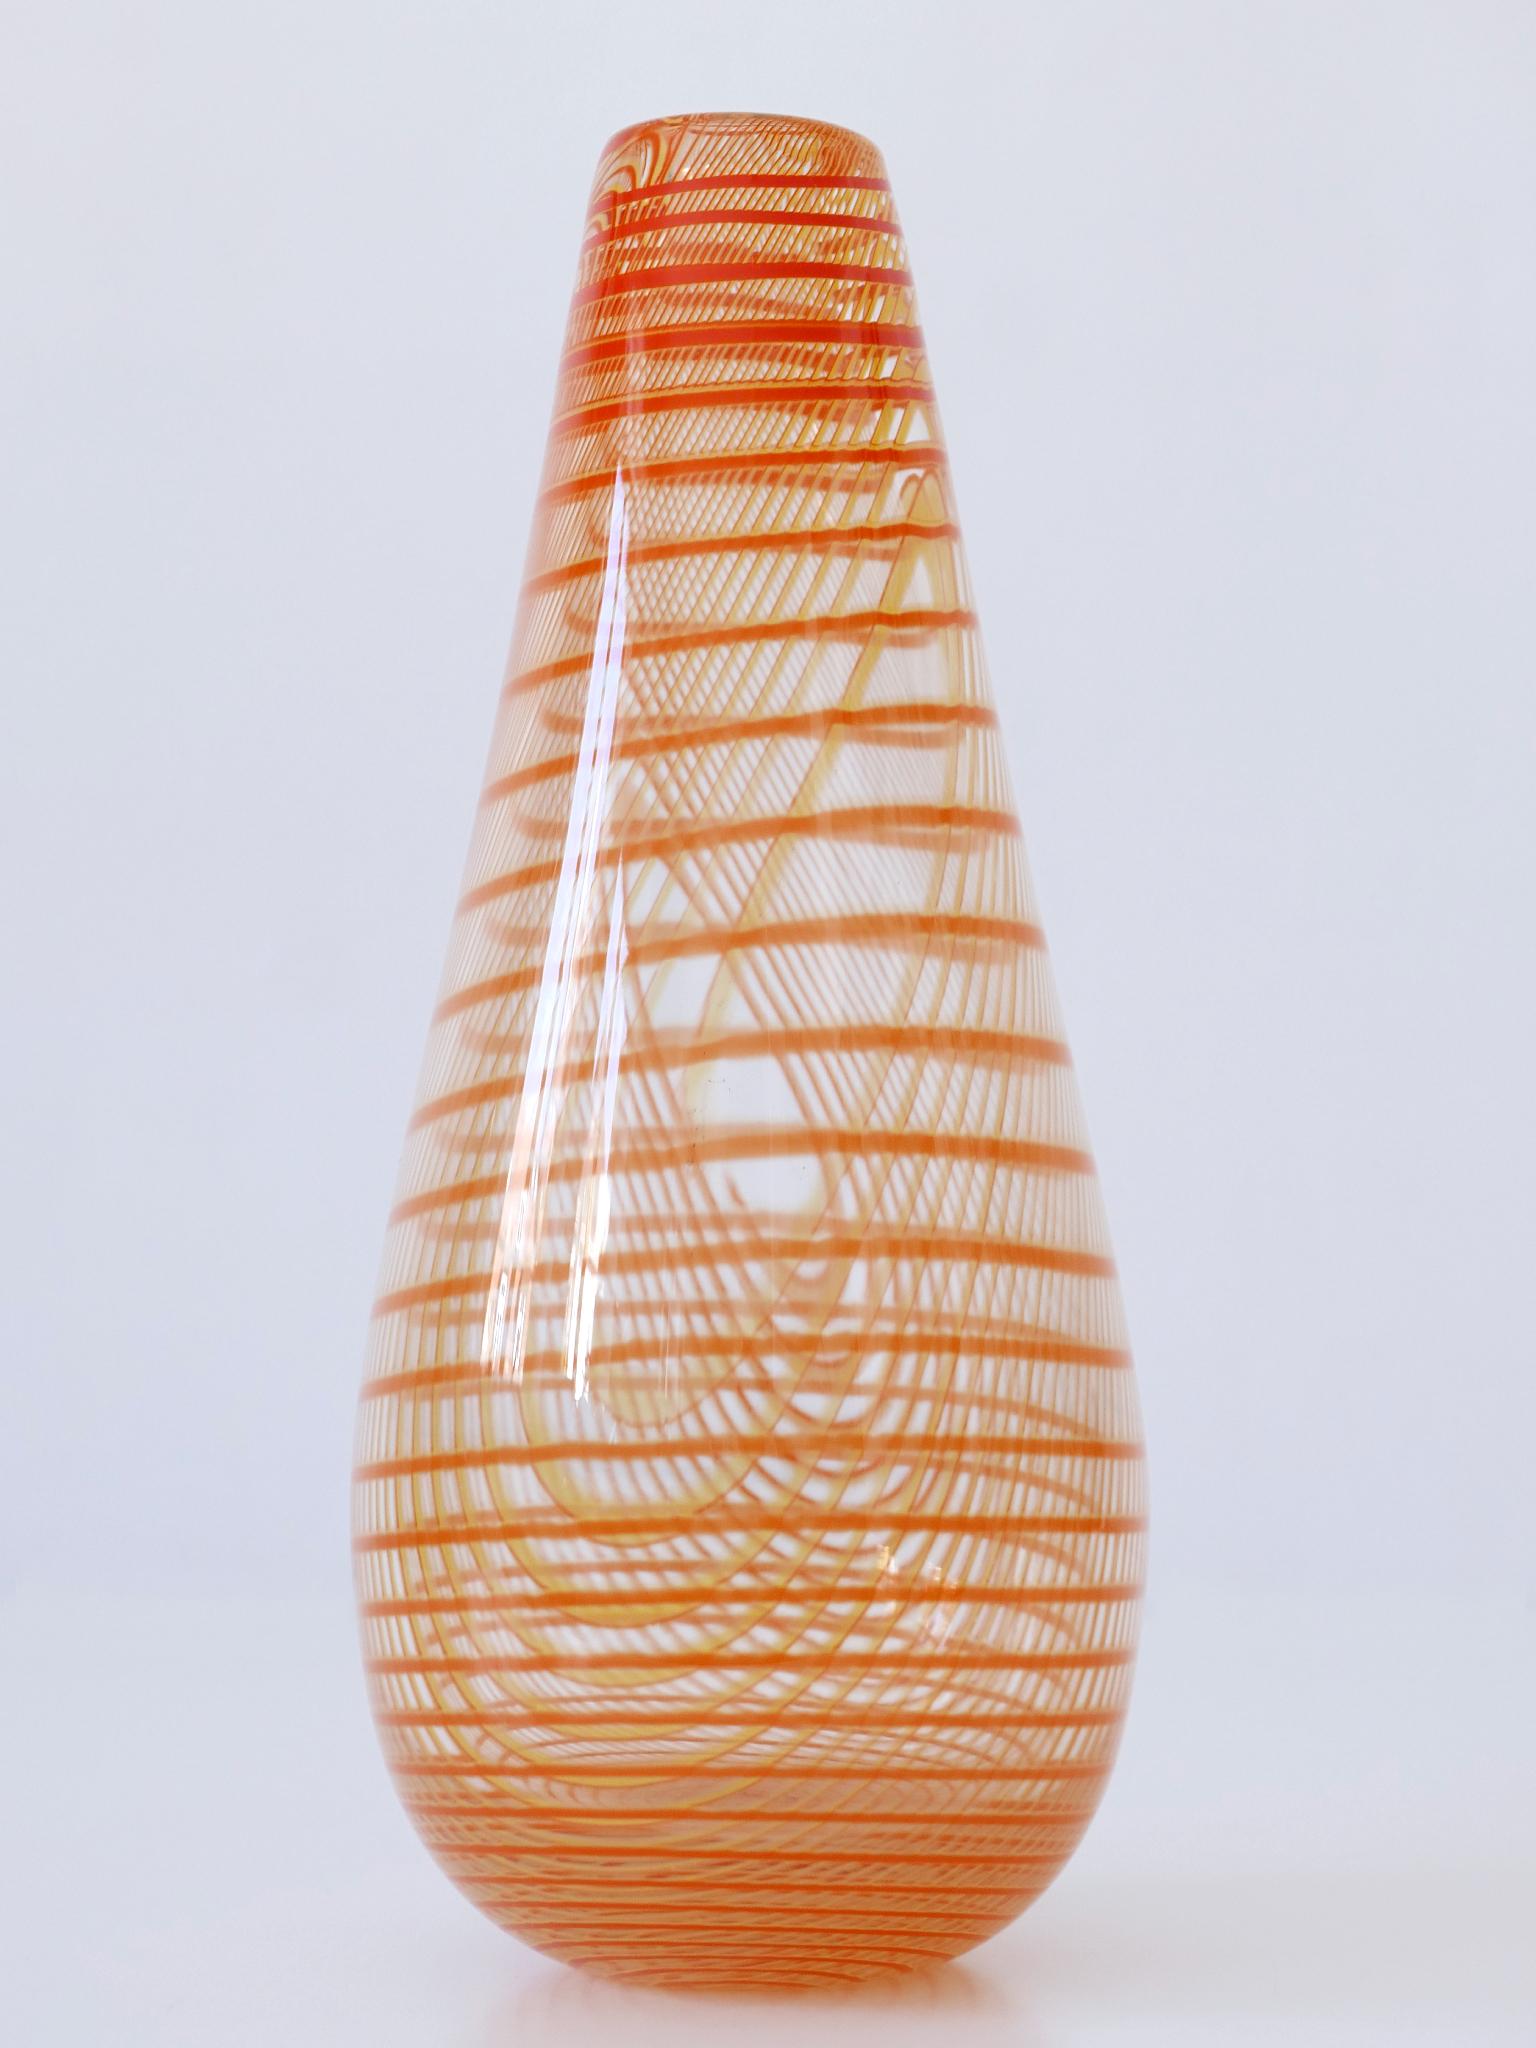 Late 20th Century Signed & Limited Edition Art Glass Vase by Olle Brozén for Kosta Boda Sweden For Sale